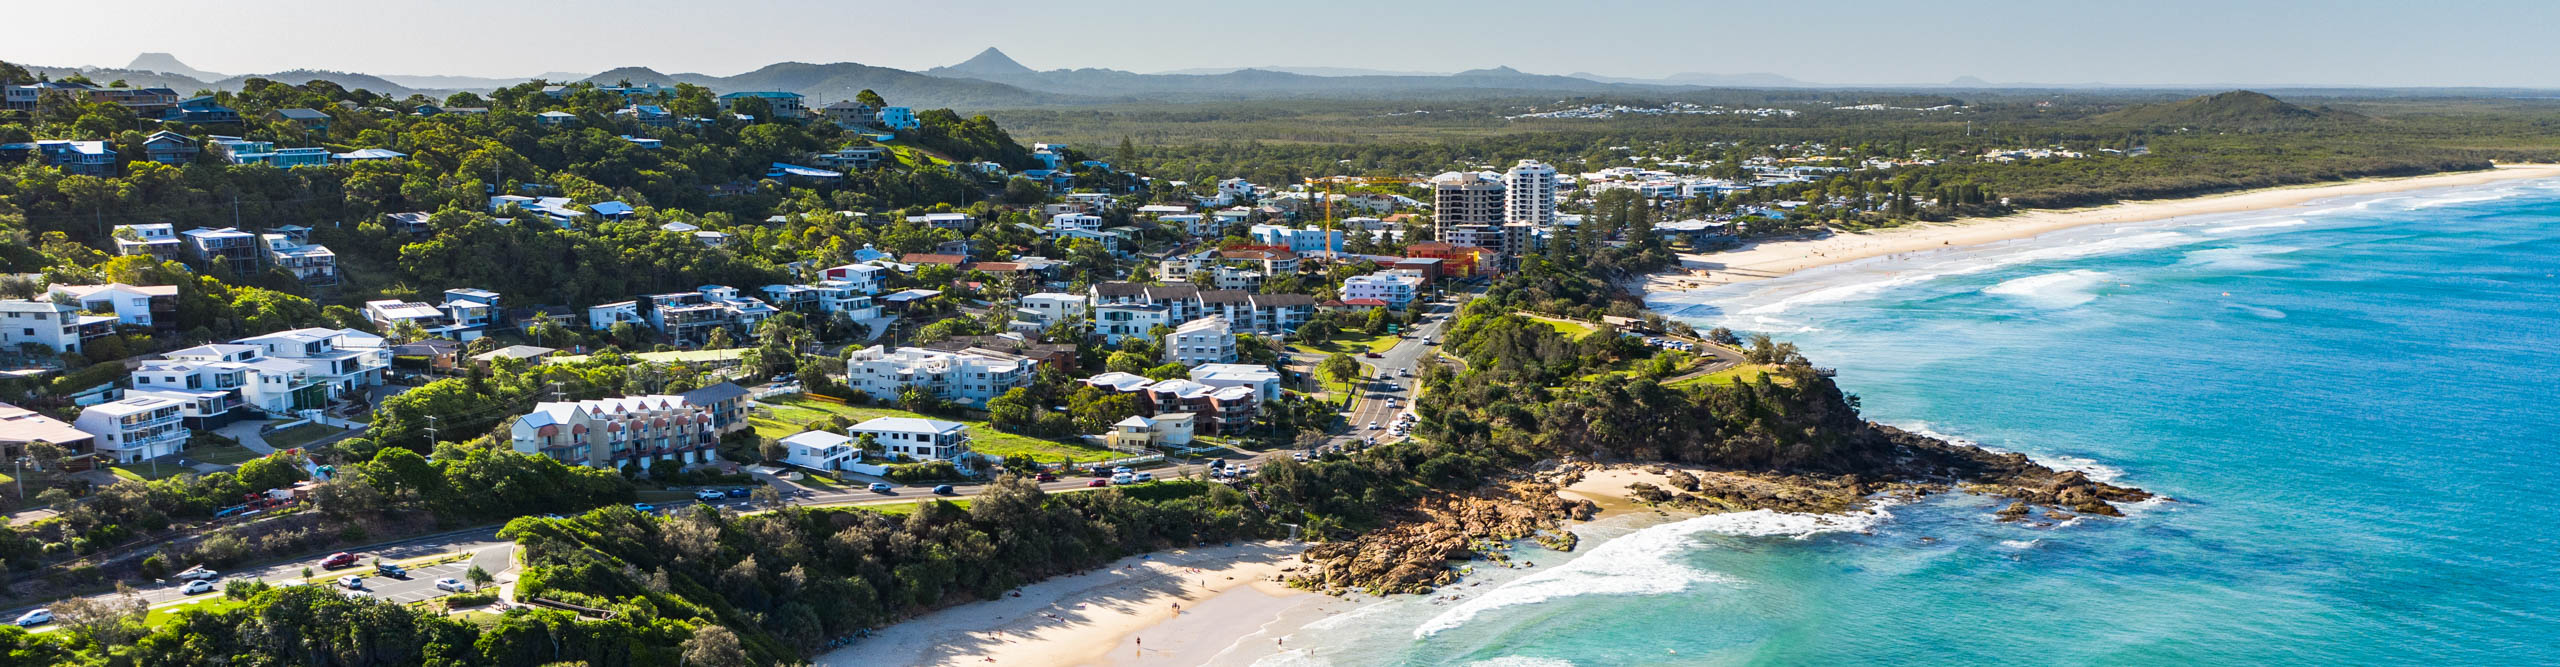 Aerial view of Noosa and the capital road on a clear sunny day, Queensland, Australia